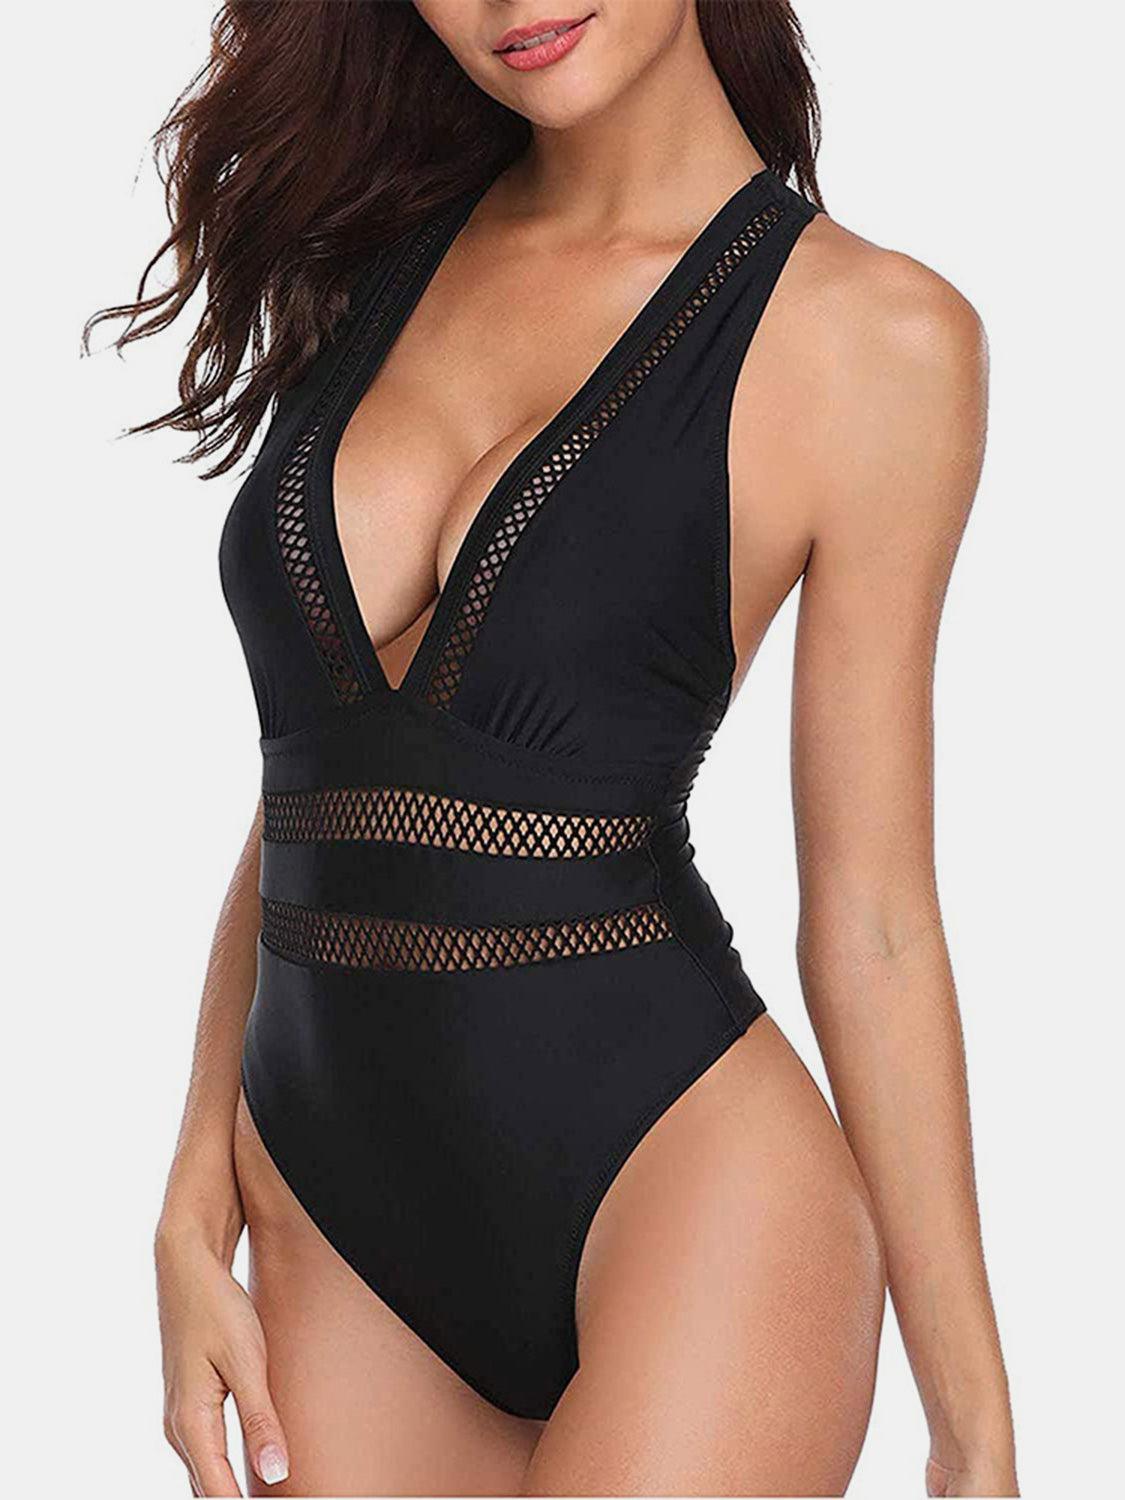 a woman in a black bodysuit with cut outs